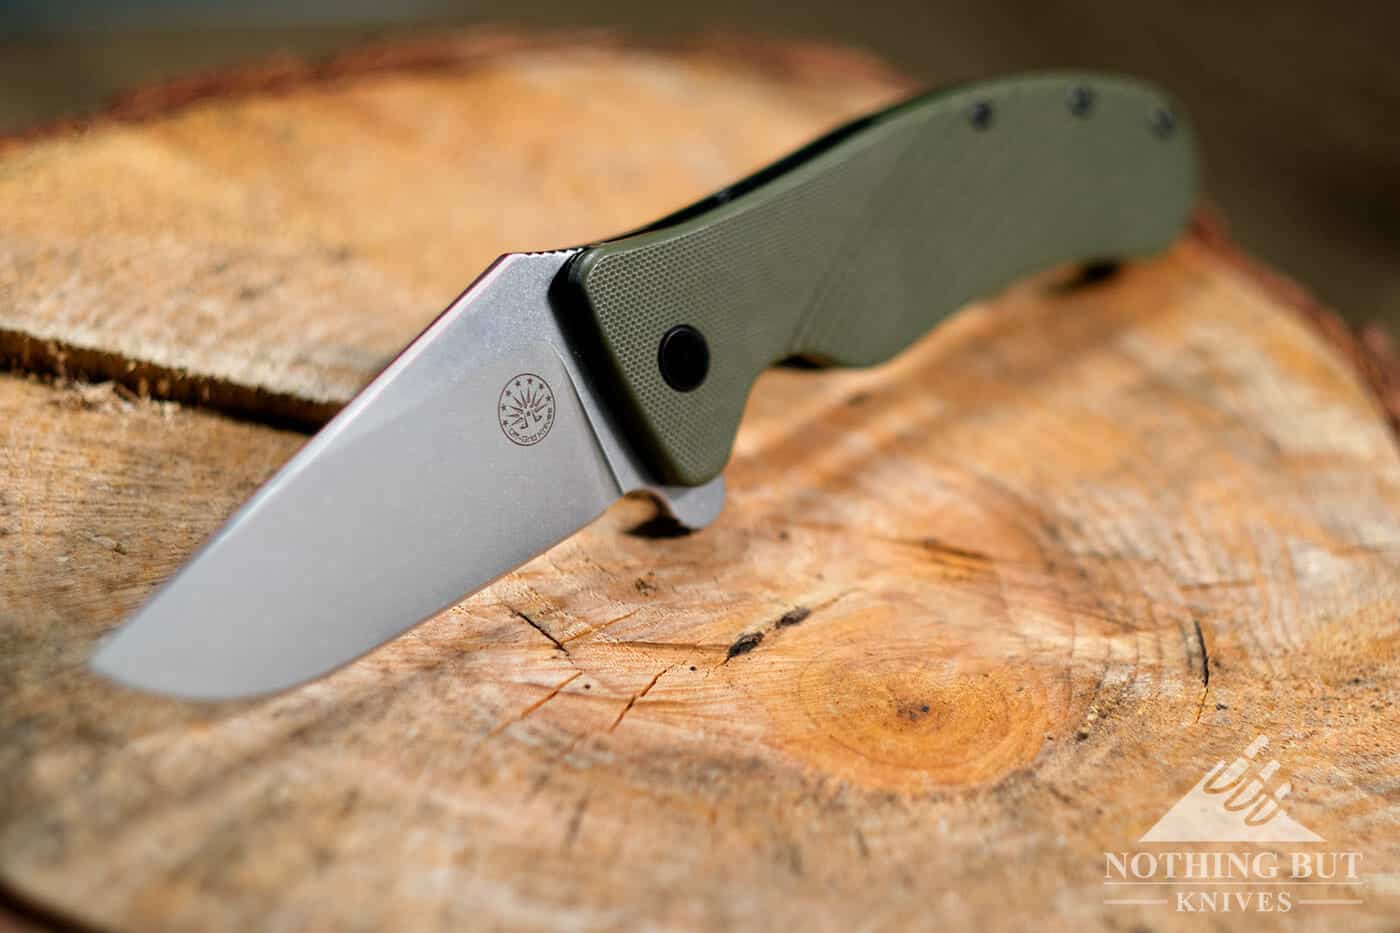 The blade on this pocket knife slices well, but is tough enough for hard work. 